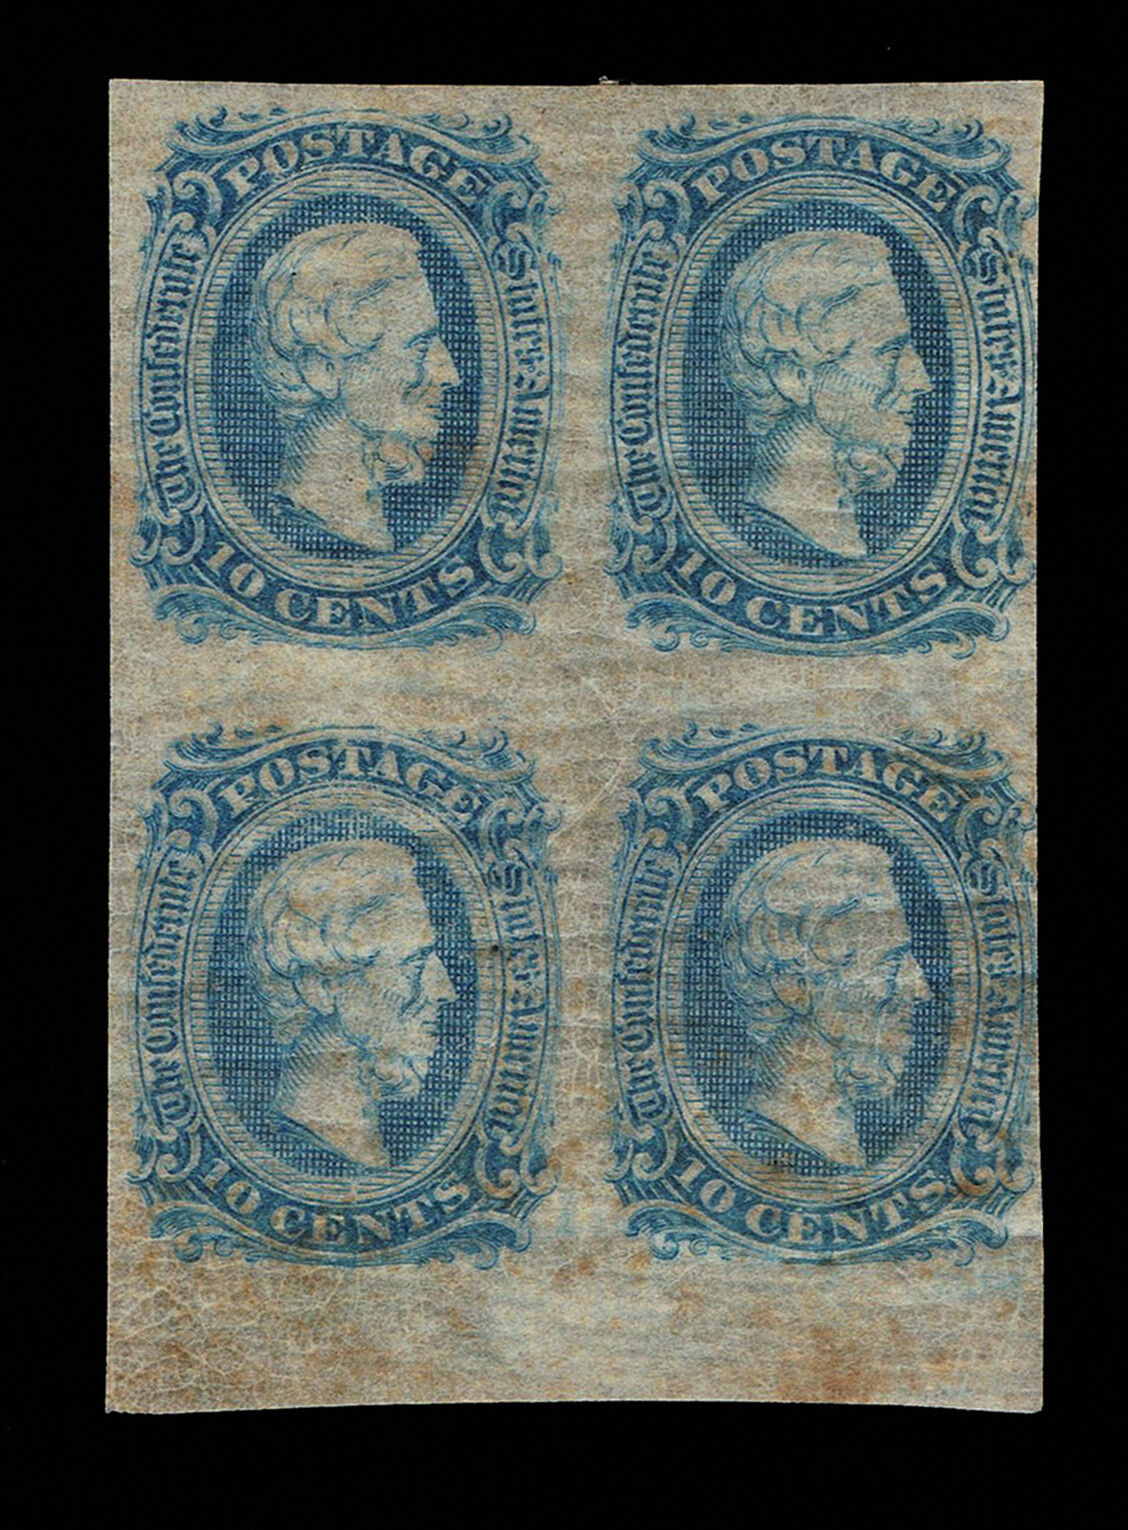 GENUINE CONFEDERATE CSA SCOTT #11 DIE-A BLUE 10¢ BLOCK OF 4 MINT NG THICK PAPER